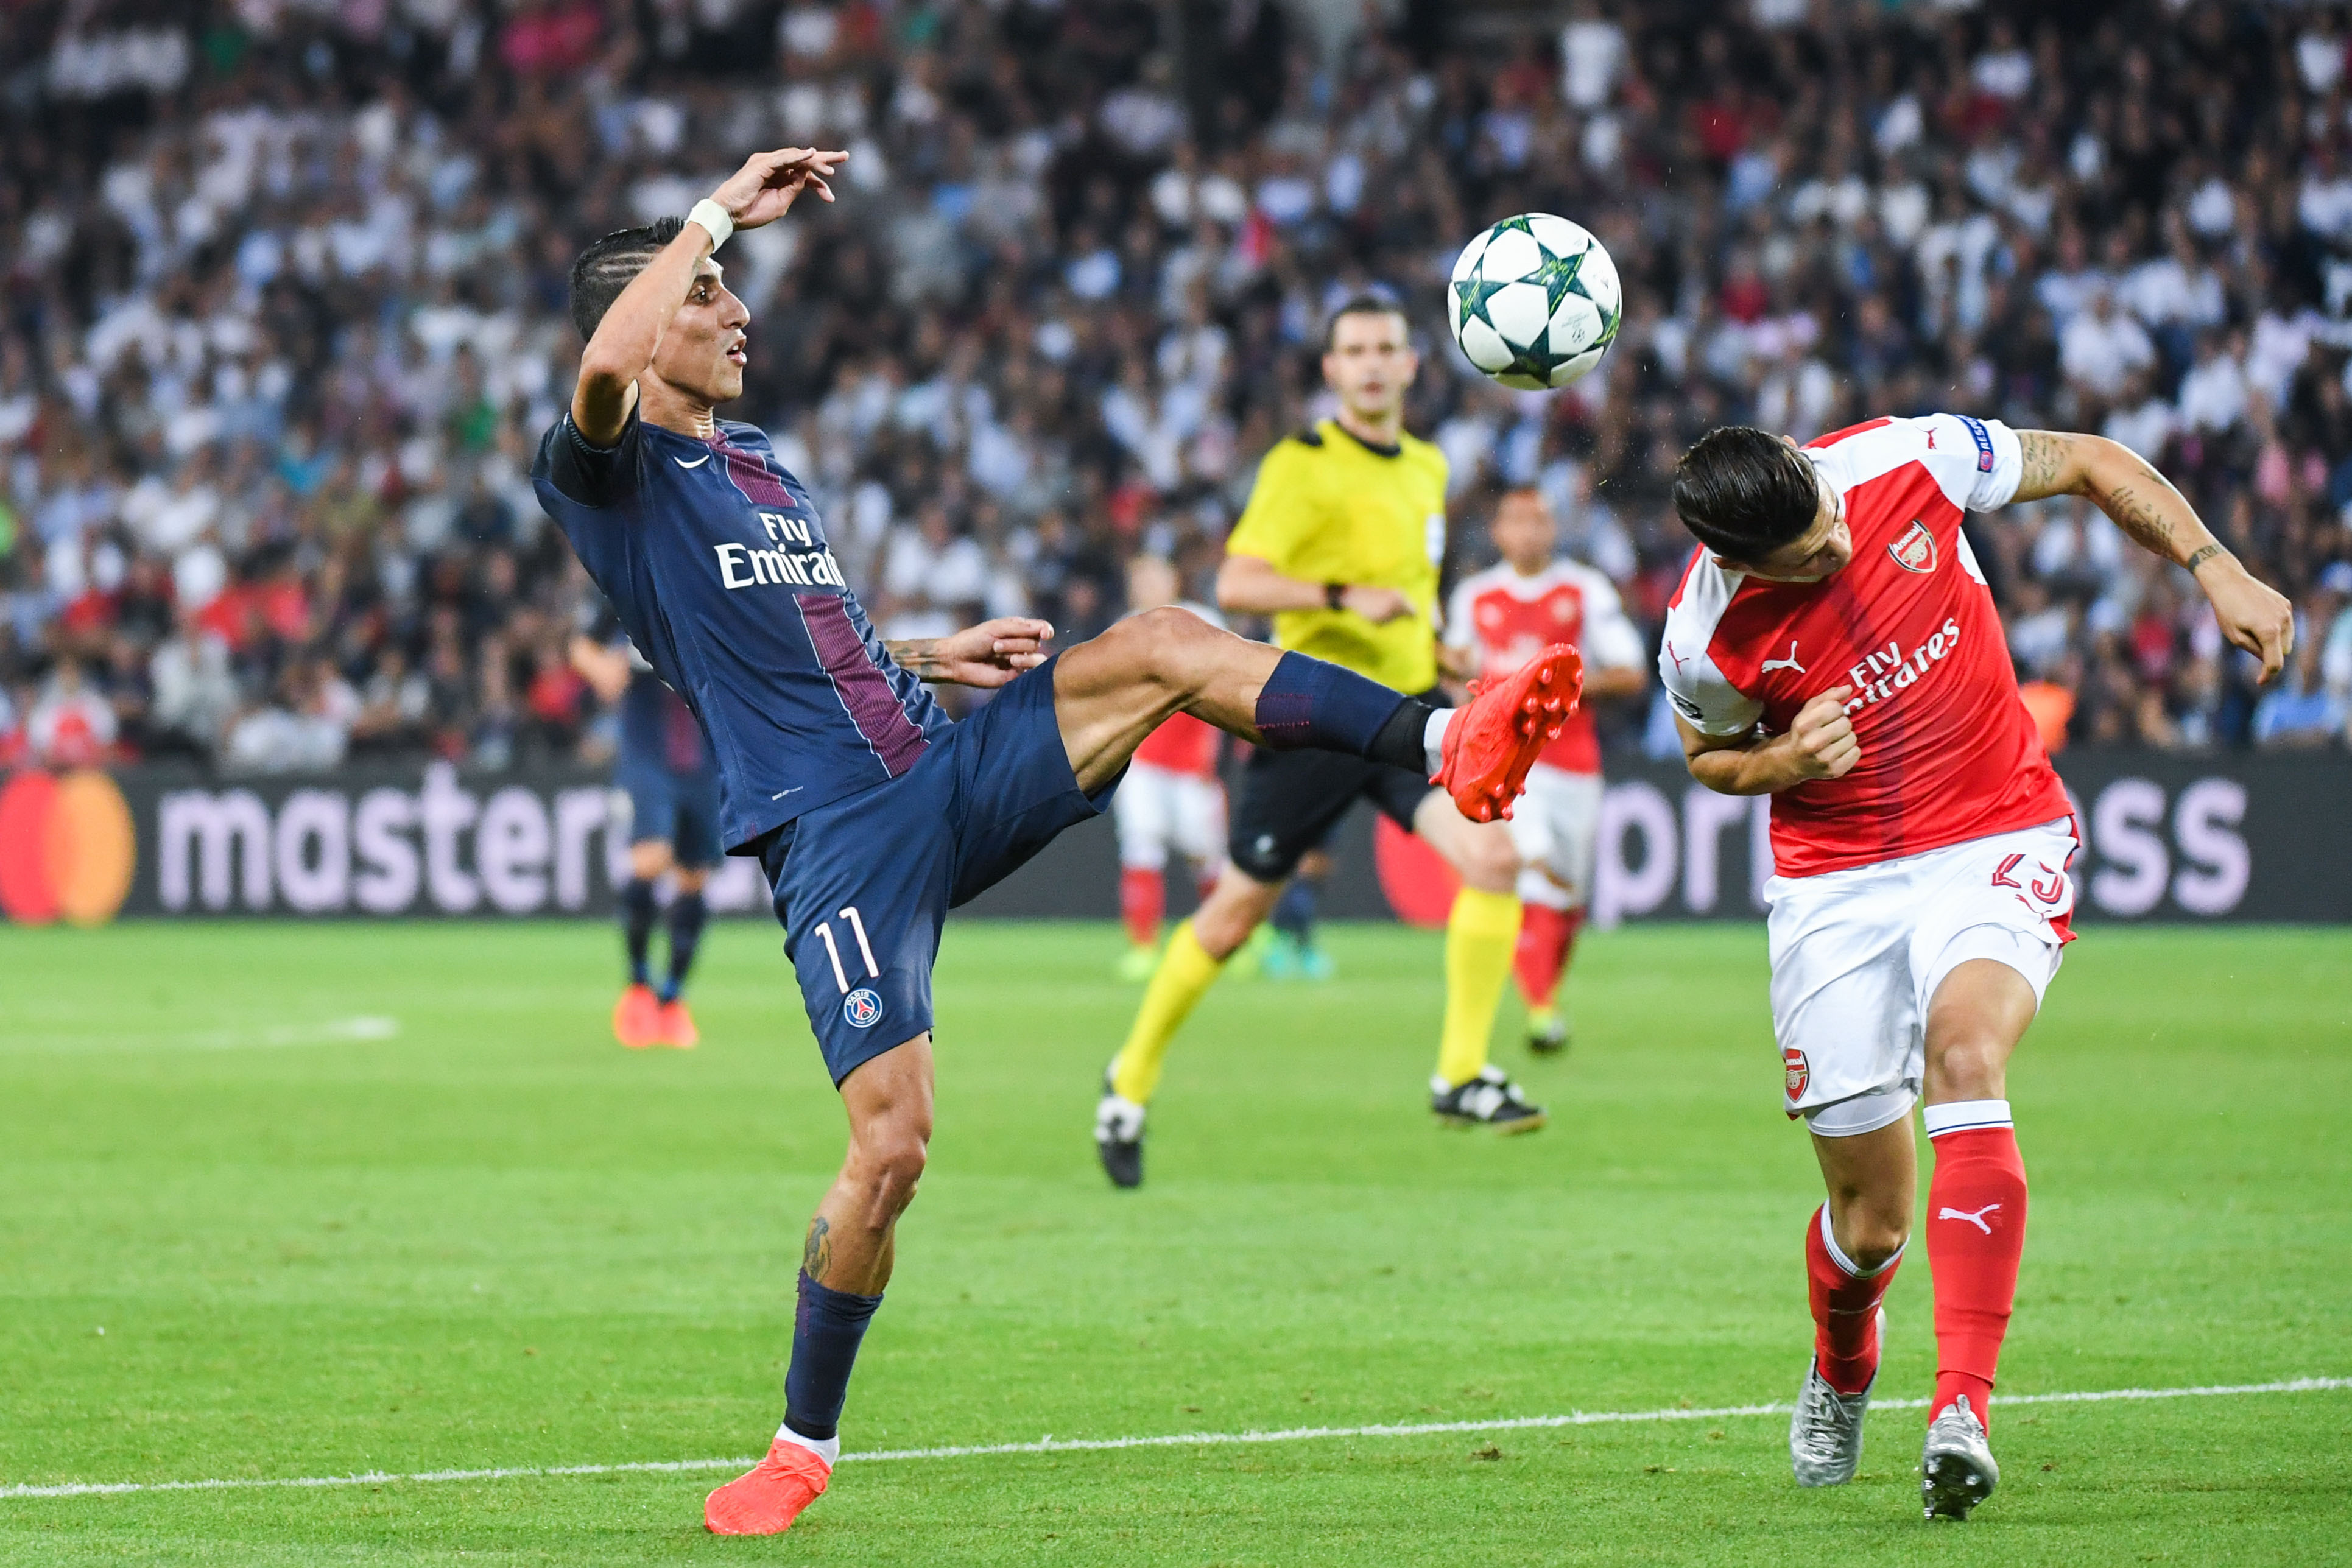 Angel Di Maria of Paris and Granit Xhaka of Arsenal during the Uefa Champions League match between Paris Saint Germain and Arsenal at Parc des Princes on September 13, 2016 in Paris, France. (Photo by Anthony Dibon/Icon Sport) (Photo by Anthony Dibon/Icon Sport via Getty Images)